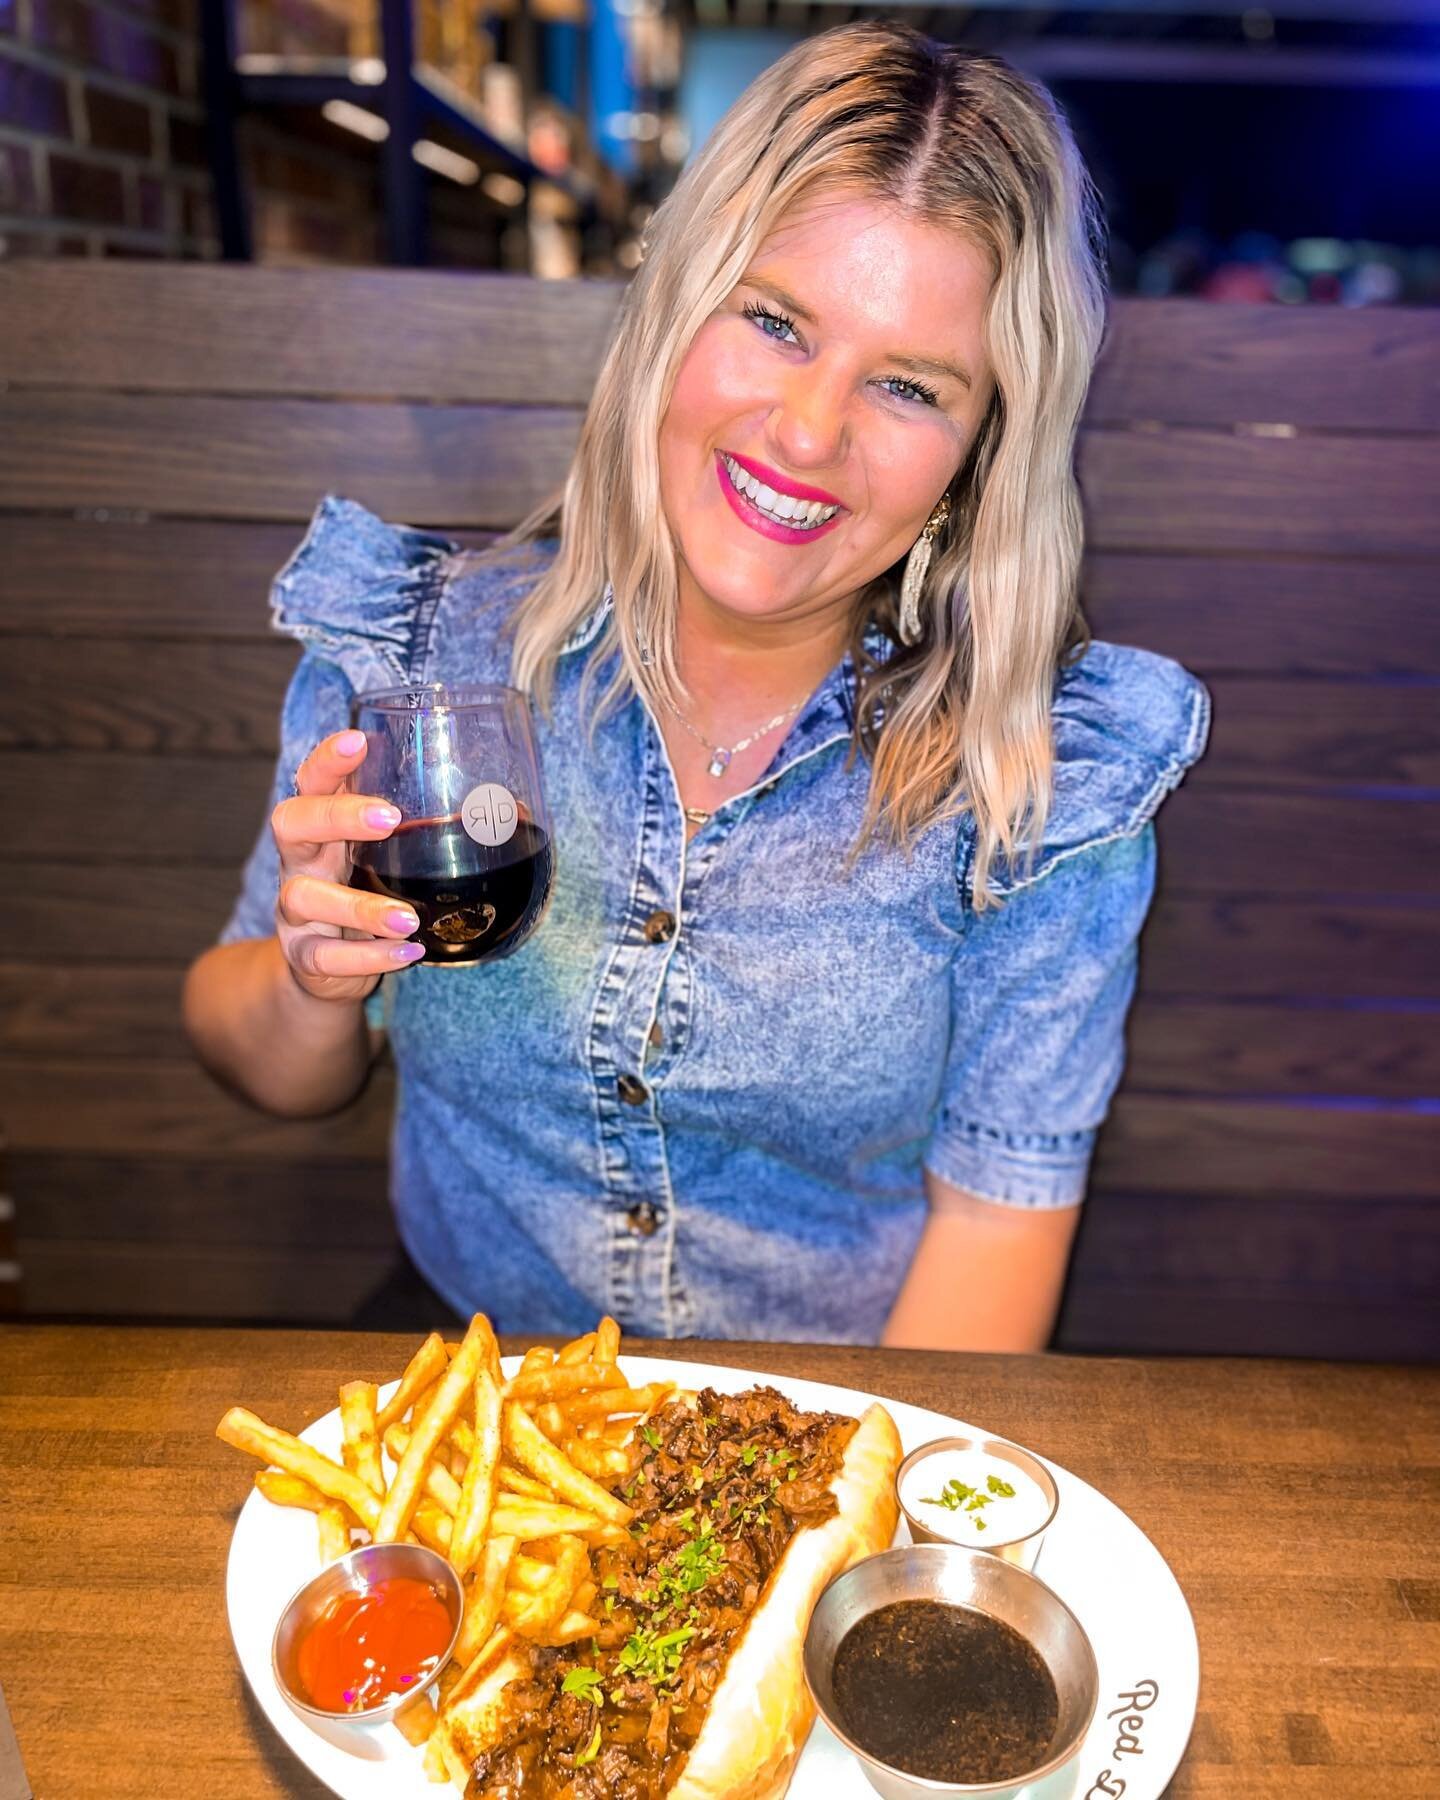 Happy Birthday to @RedDoorGrillKC 🥳

Red Door is celebrating 10 Years of being your best little upscale neighborhood joint in Kansas City and in honor of this BIG birthday celebration I am teaming up with them to gift six lucky winners (one for each